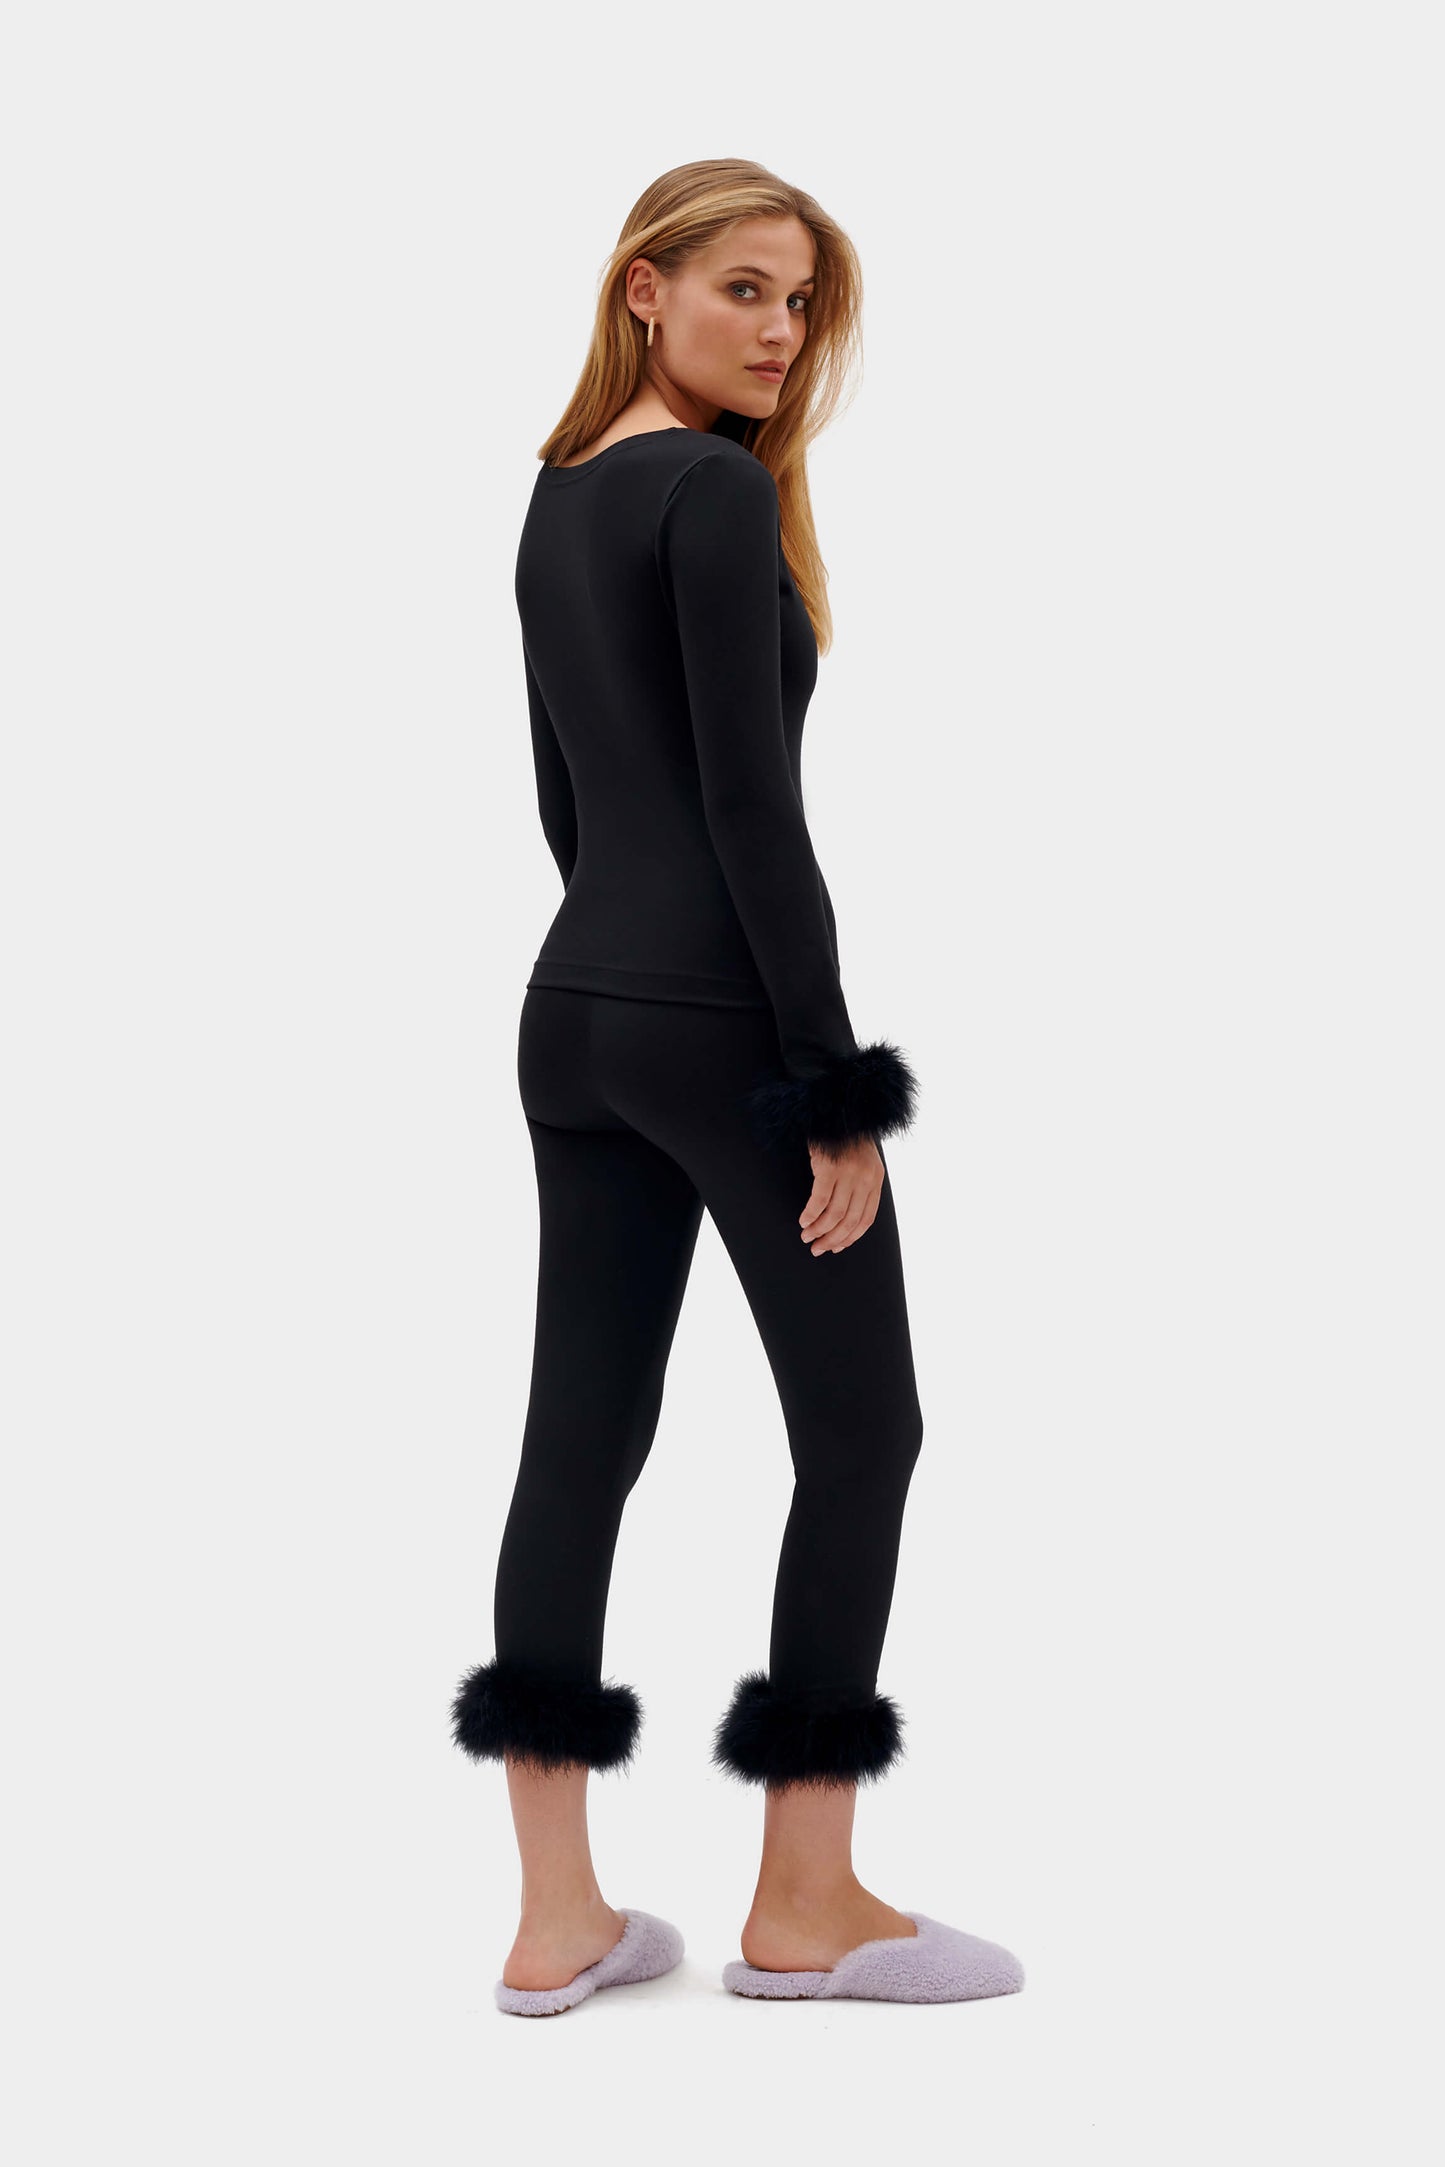 The Weekend Chic Set with Leggings in Black